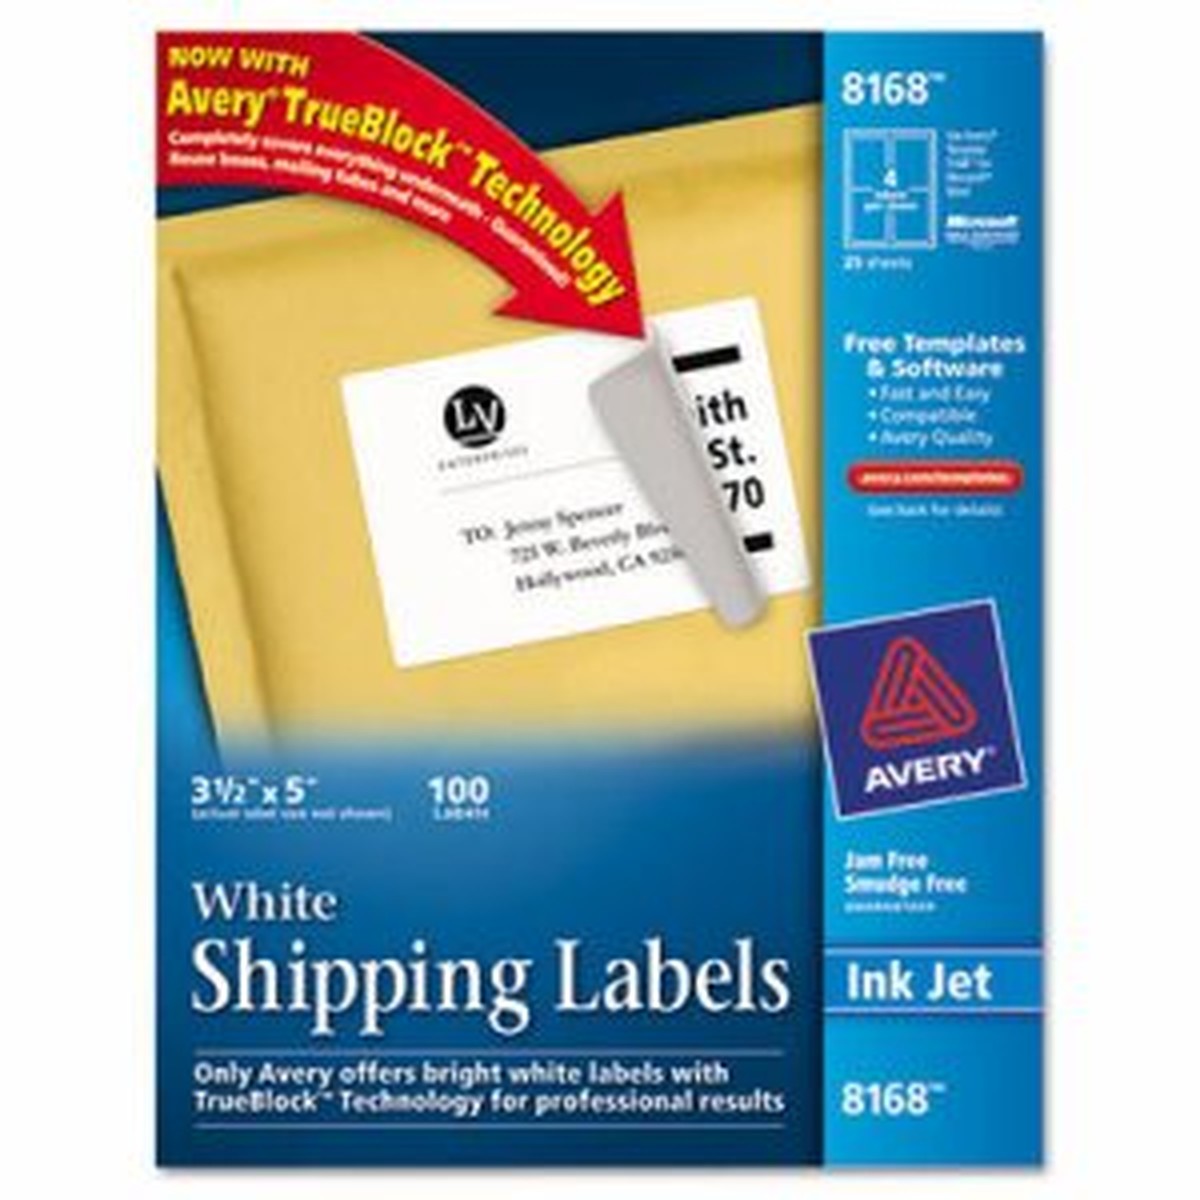 Shipping Labels with TrueBlock Technology, Inkjet, 3 1/2 x 5, White, 100/Pack